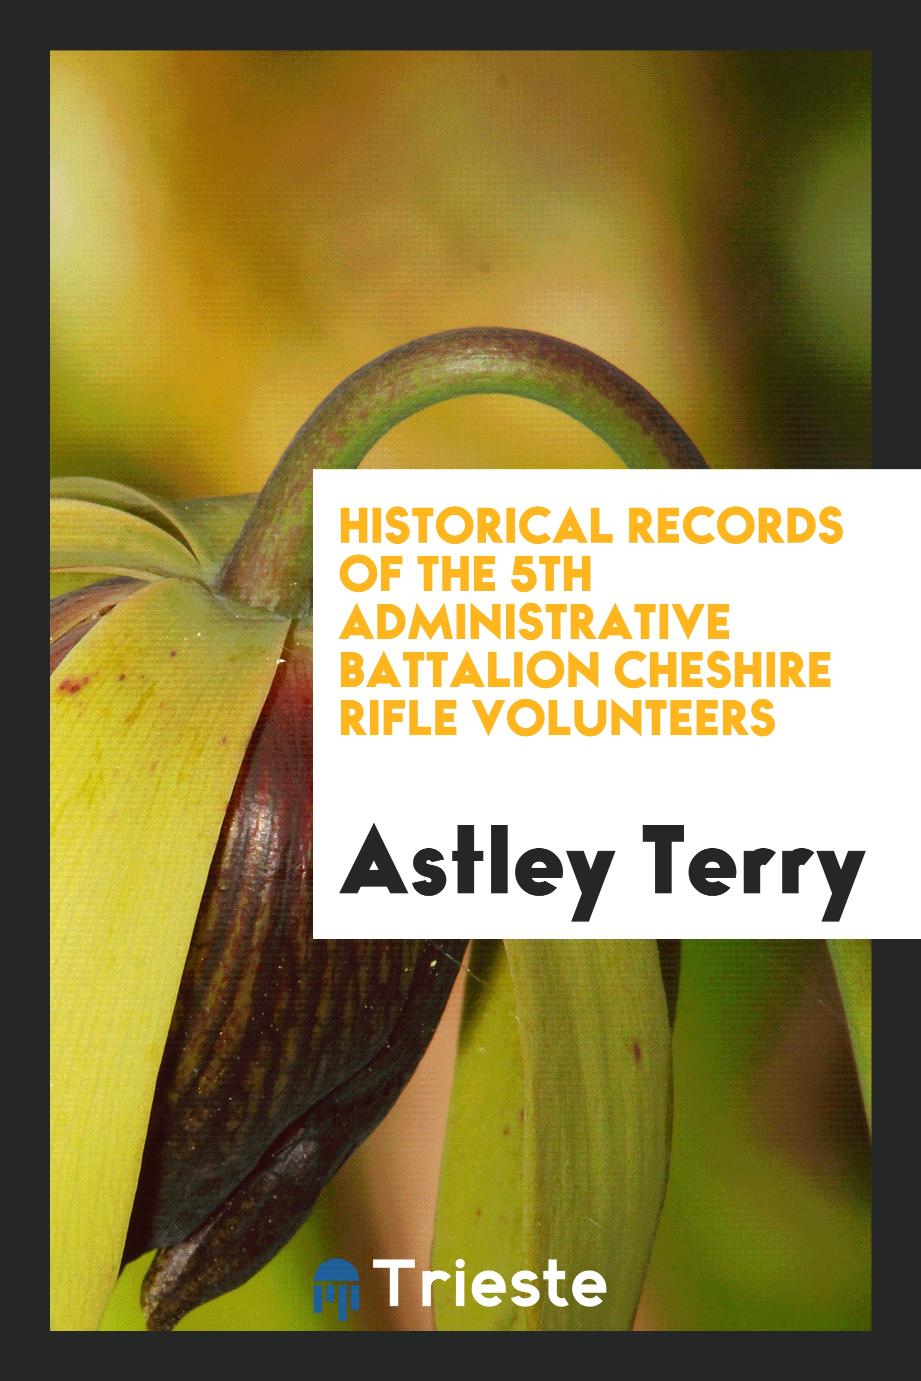 Historical Records of the 5th Administrative Battalion Cheshire Rifle Volunteers